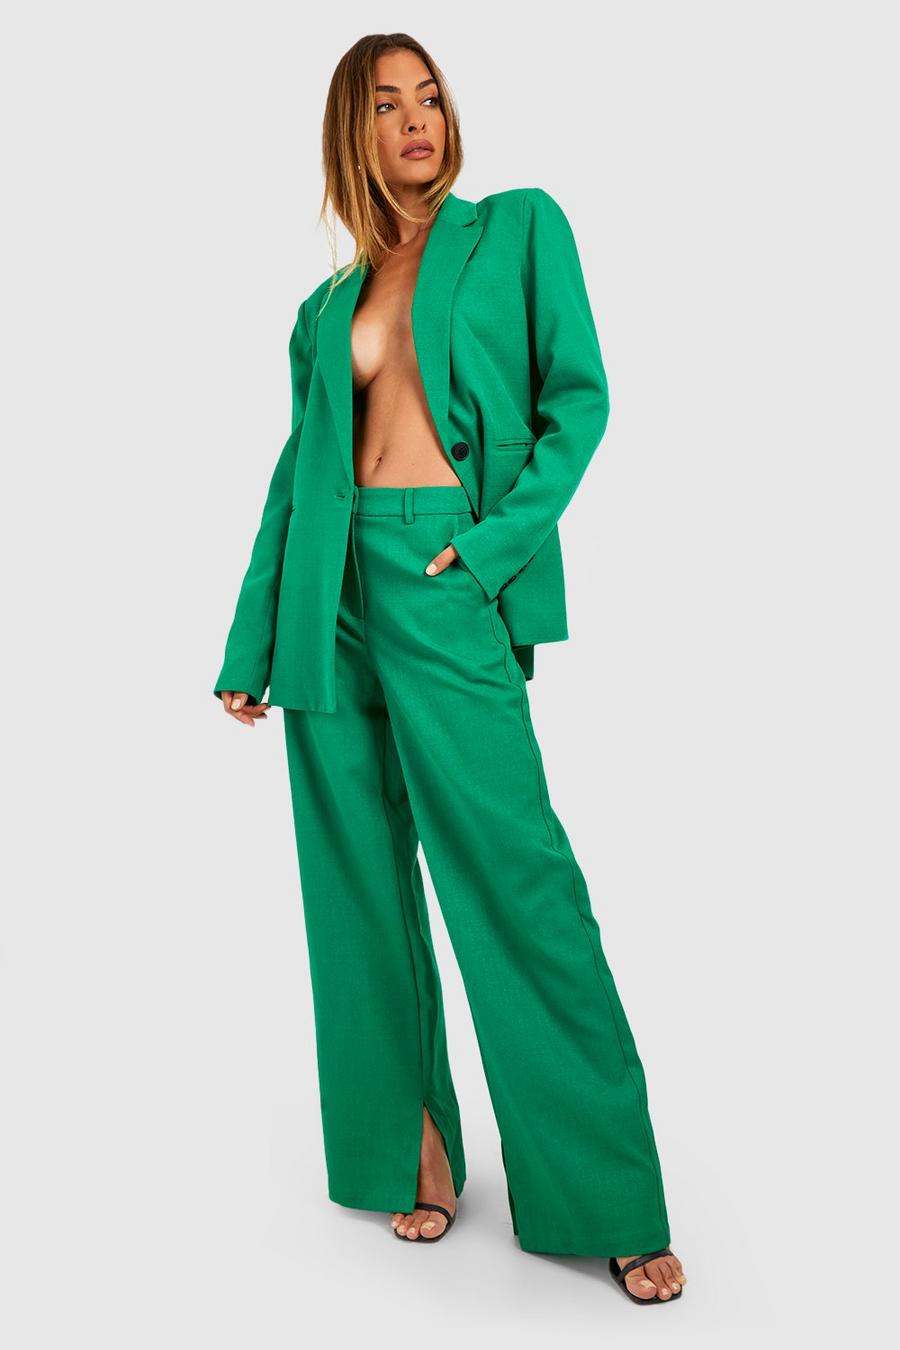 St Patricks Day Outfits Fall Fits  Green Cropped Blazer Wide Leg Pant –  3rdpartypeople